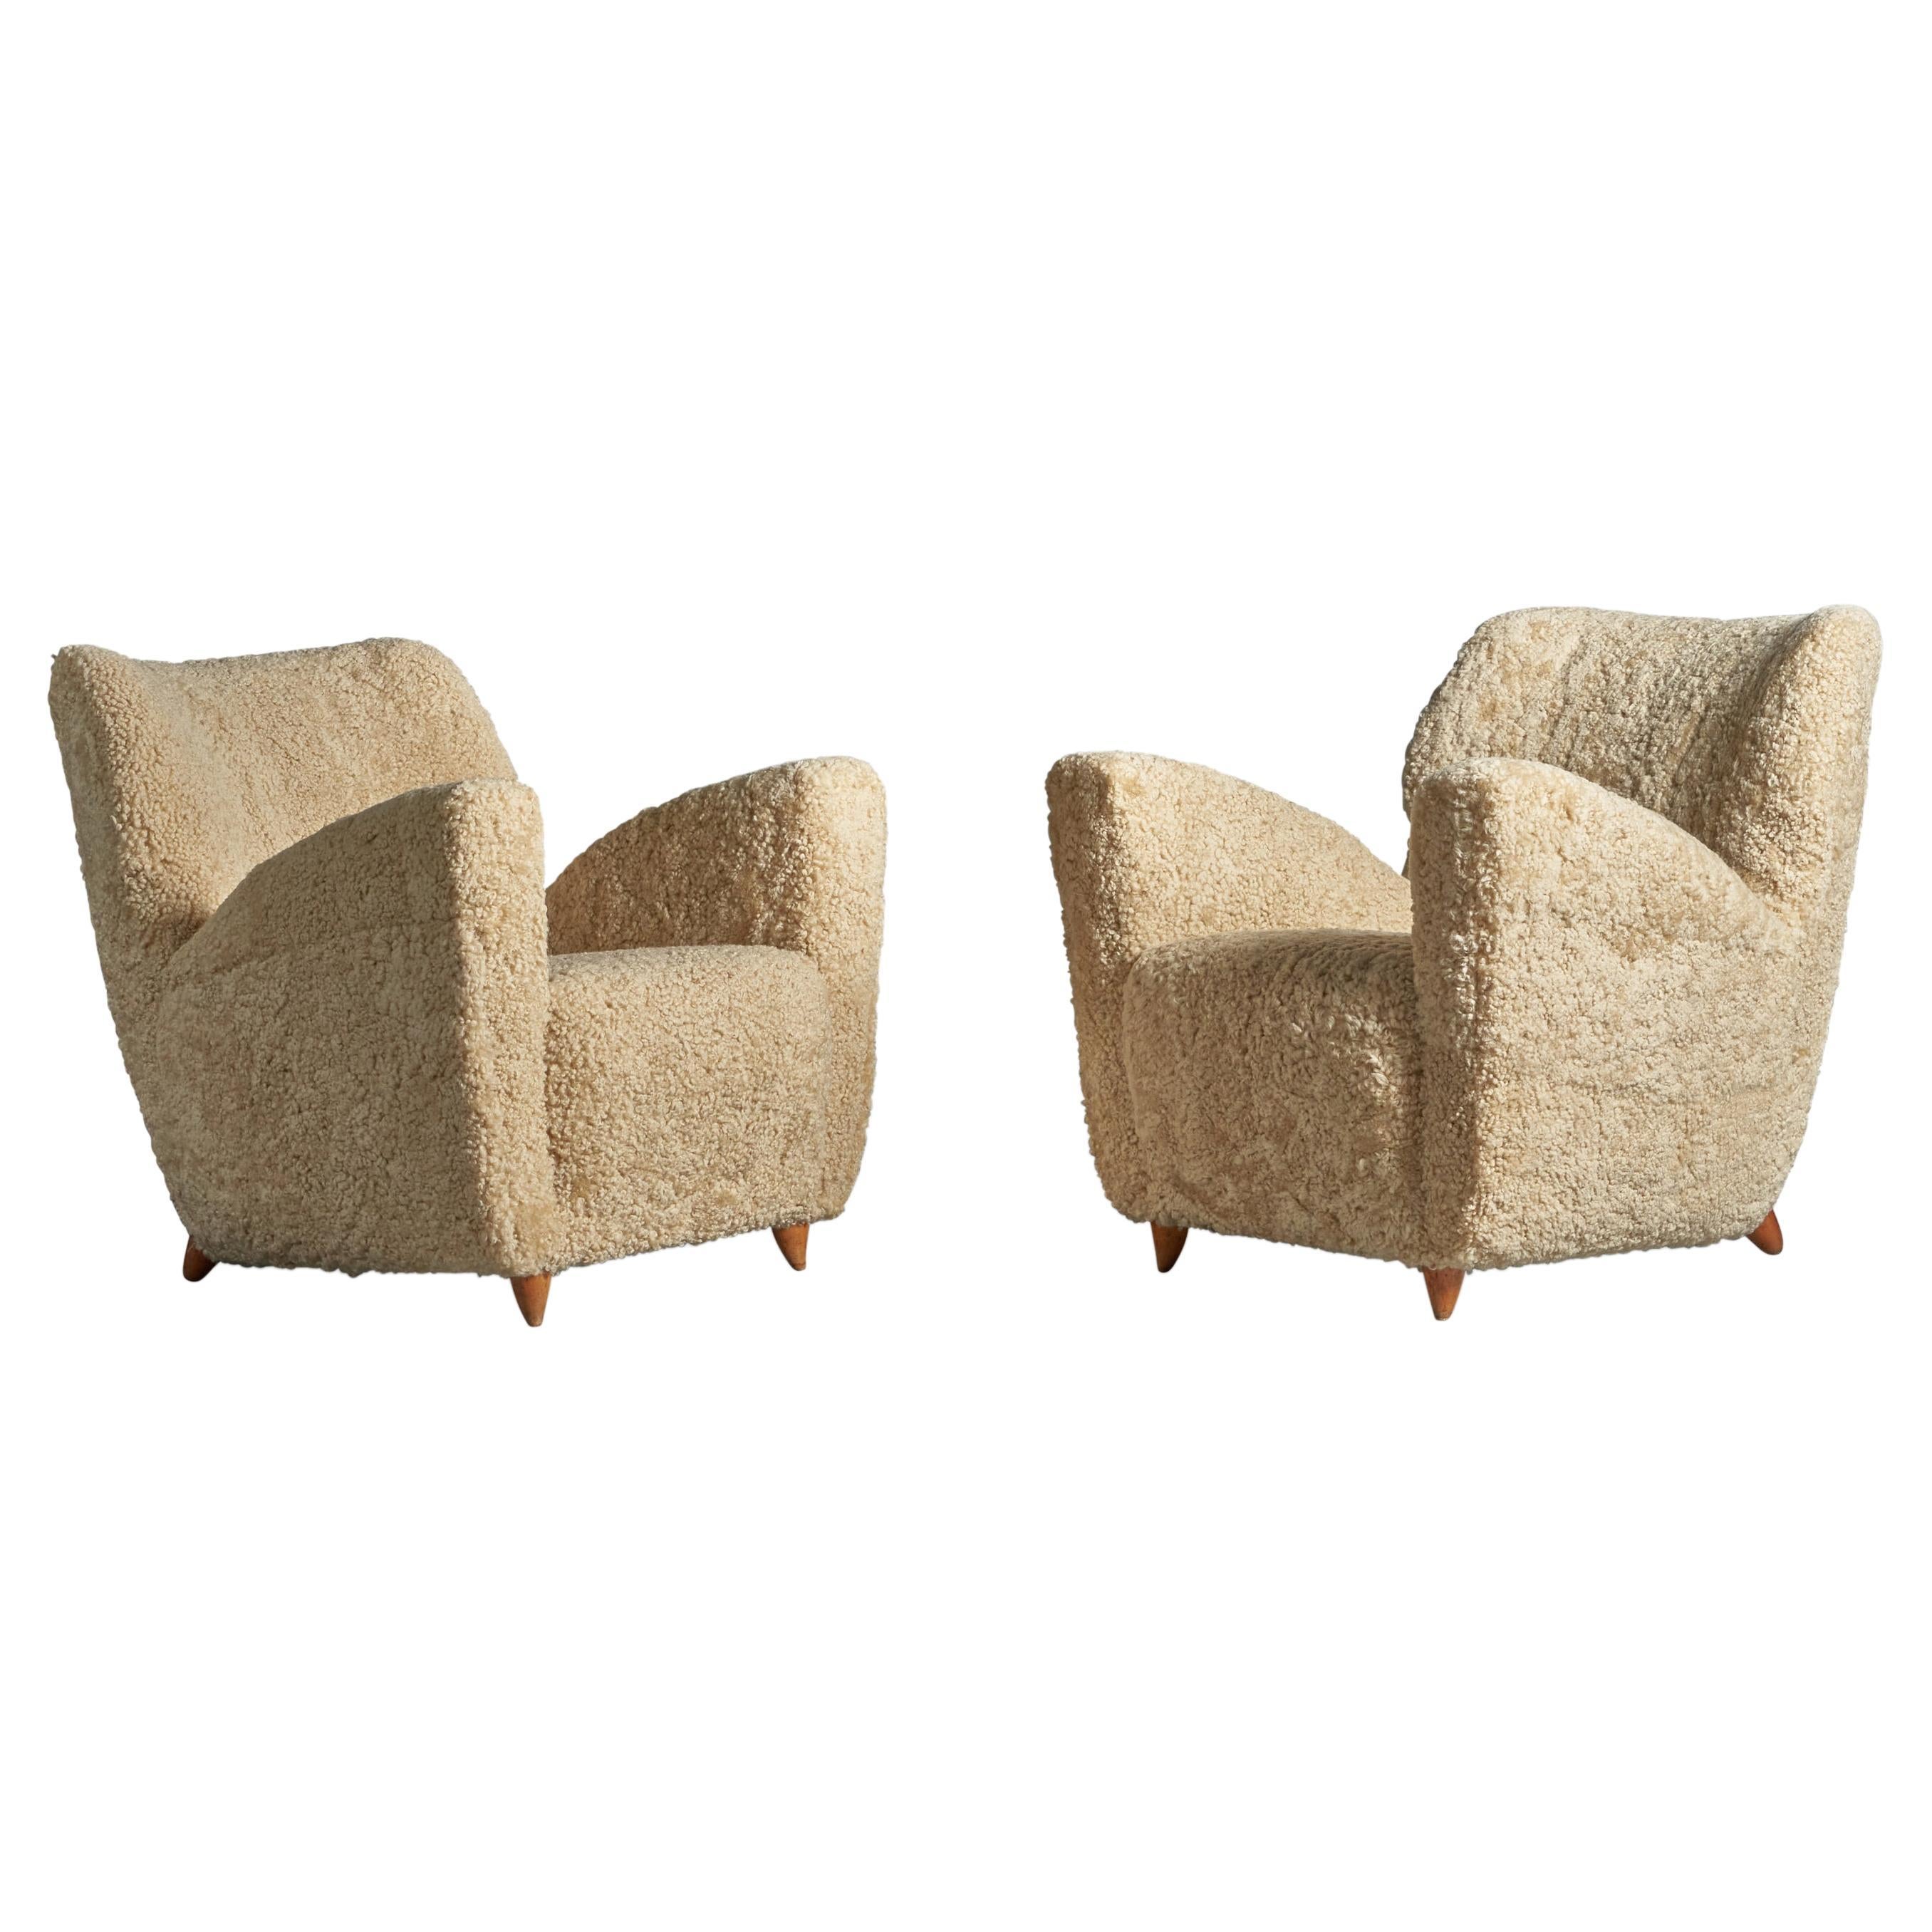 Italian Designer, Lounge Chairs, Shearling, Wood, Italy, 1940s For Sale